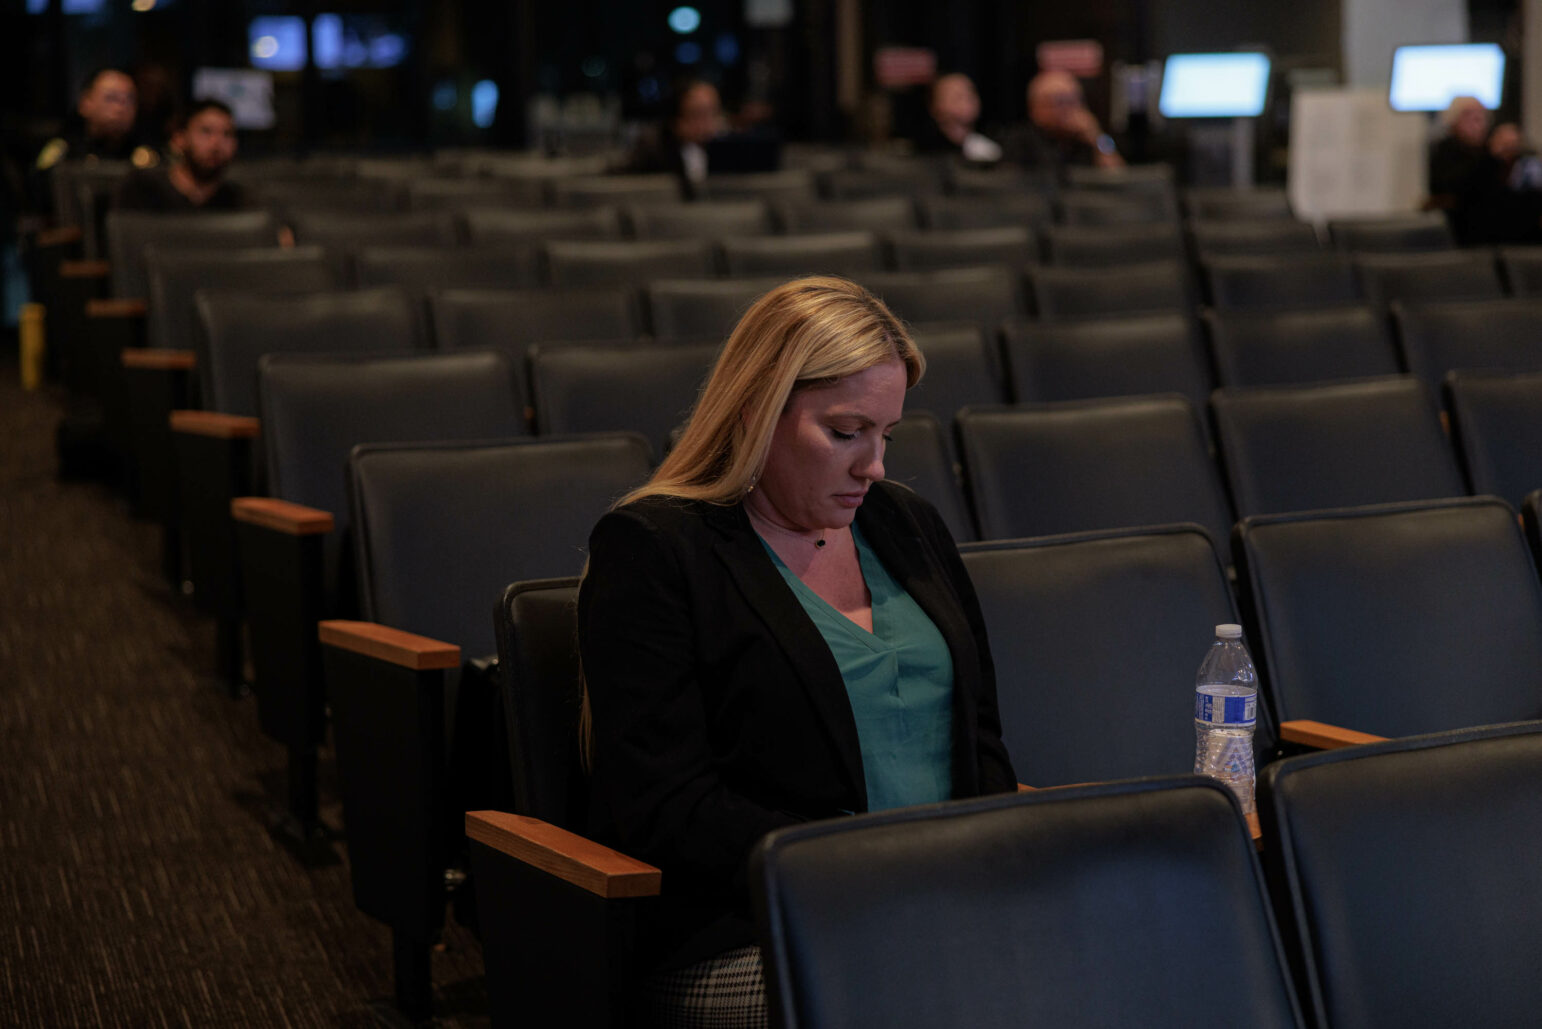 A lone woman sits in a large auditorium with rows of empty seats around her. She is looking down at her phone, engrossed in its content. The setting suggests an atmosphere of isolation or reflection amid a public space.